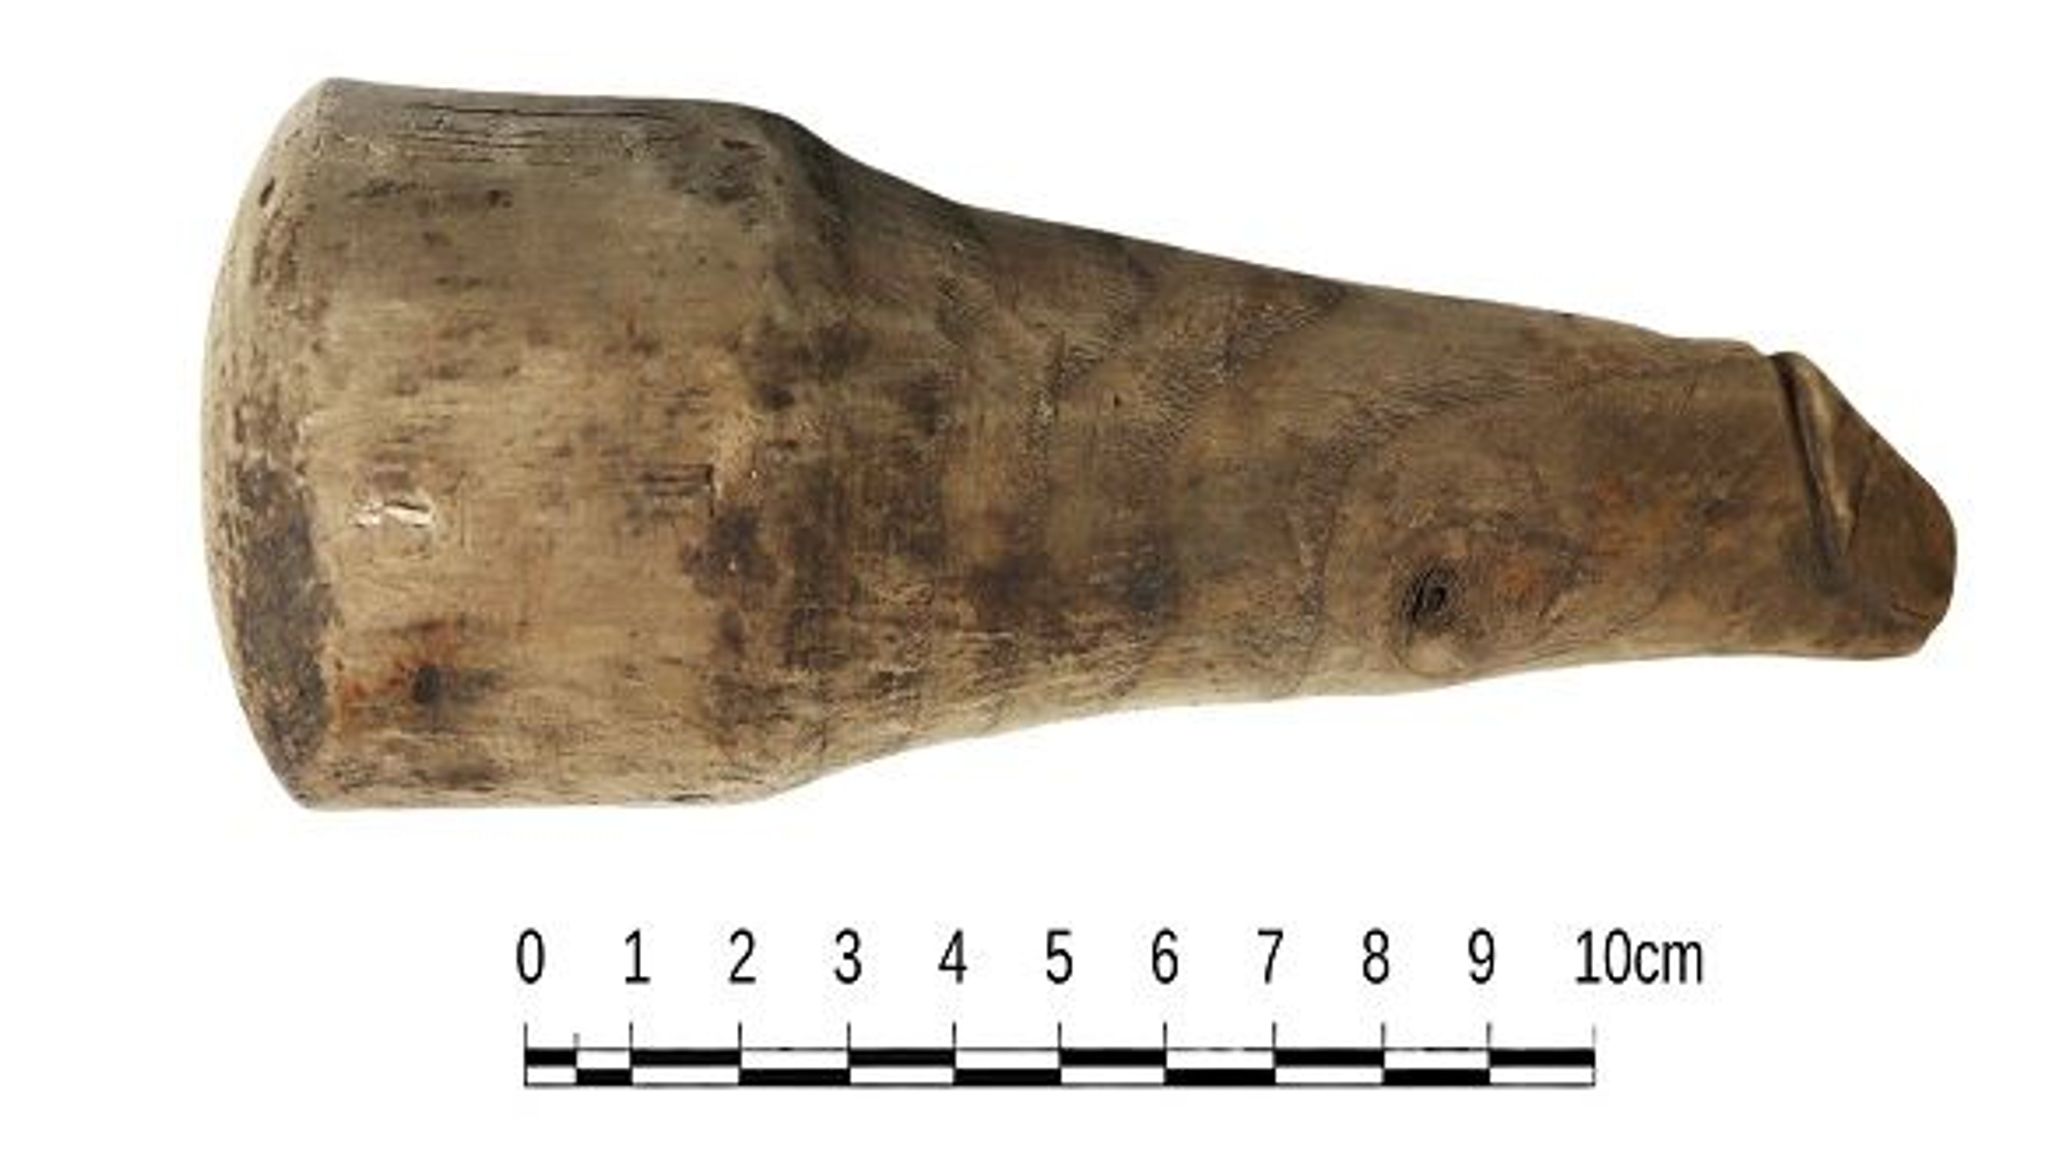 Roman sex toy discovered after experts re-examine 2,000-year-old wooden phallus found near Hadrians Wall UK News Sky News picture